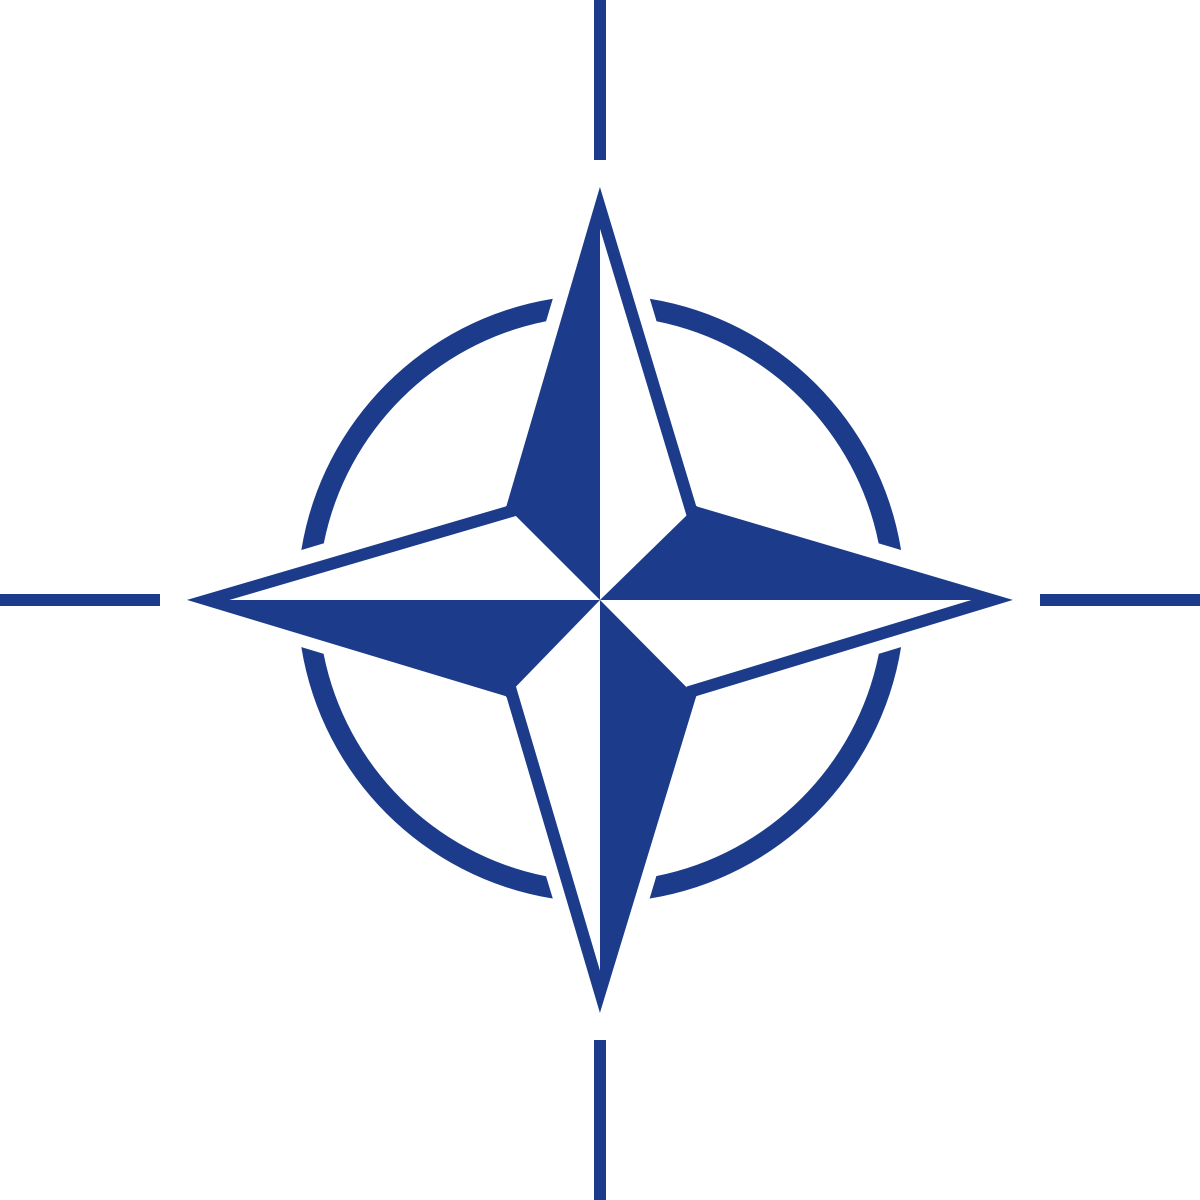 https://upload.wikimedia.org/wikipedia/commons/thumb/a/ac/Blue_compass_rose.svg/1200px-Blue_compass_rose.svg.png